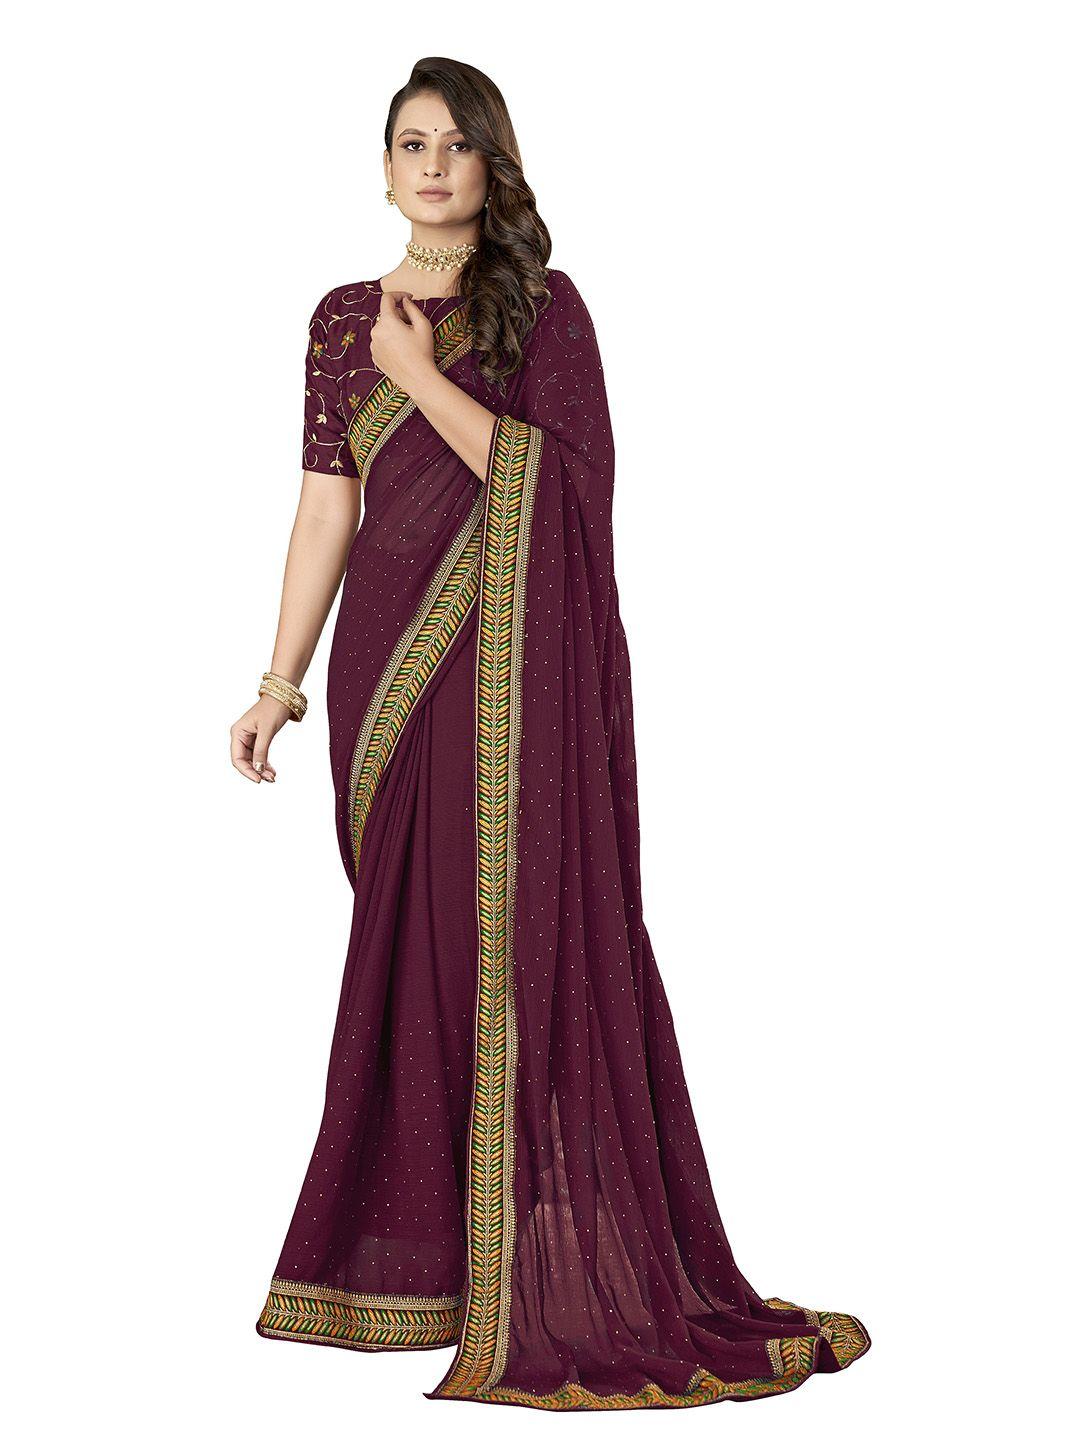 sutram embellished embroidered border pure chiffon saree